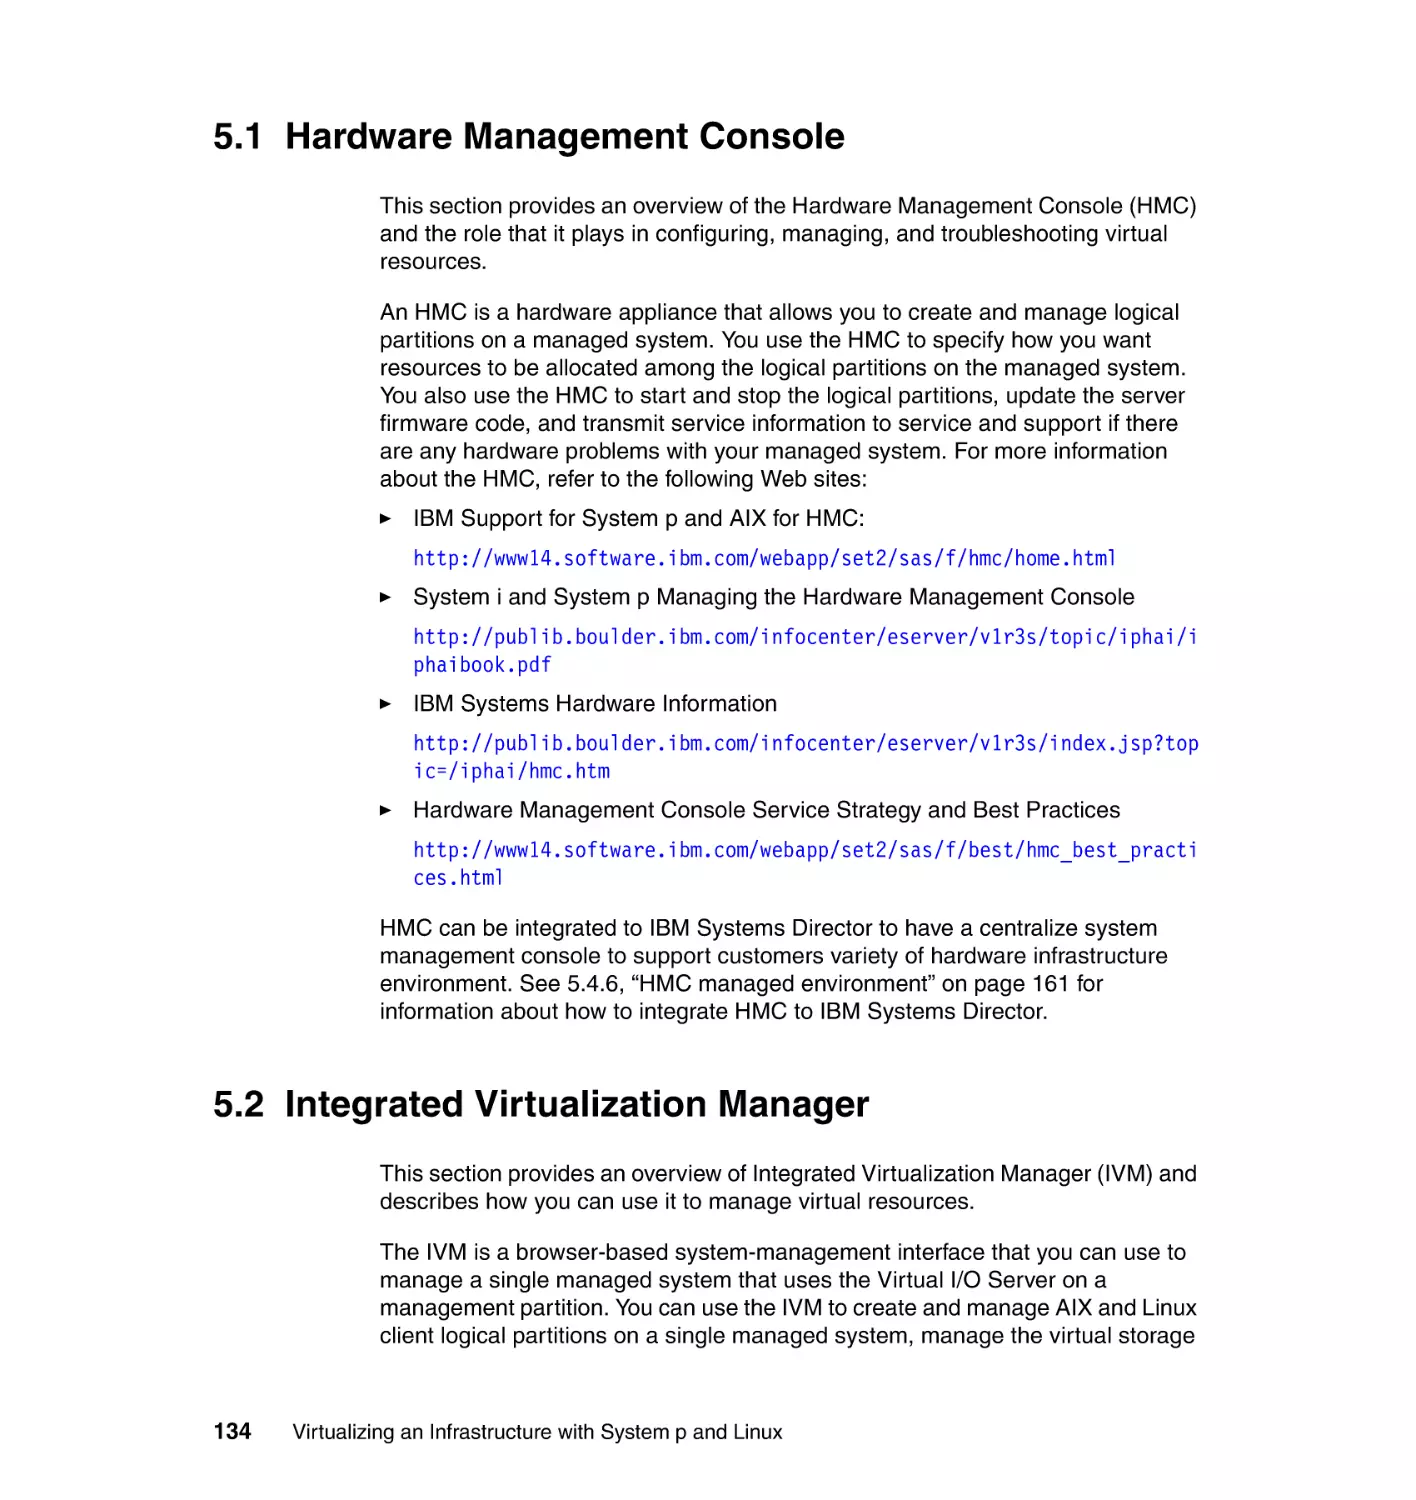 5.1 Hardware Management Console
5.2 Integrated Virtualization Manager